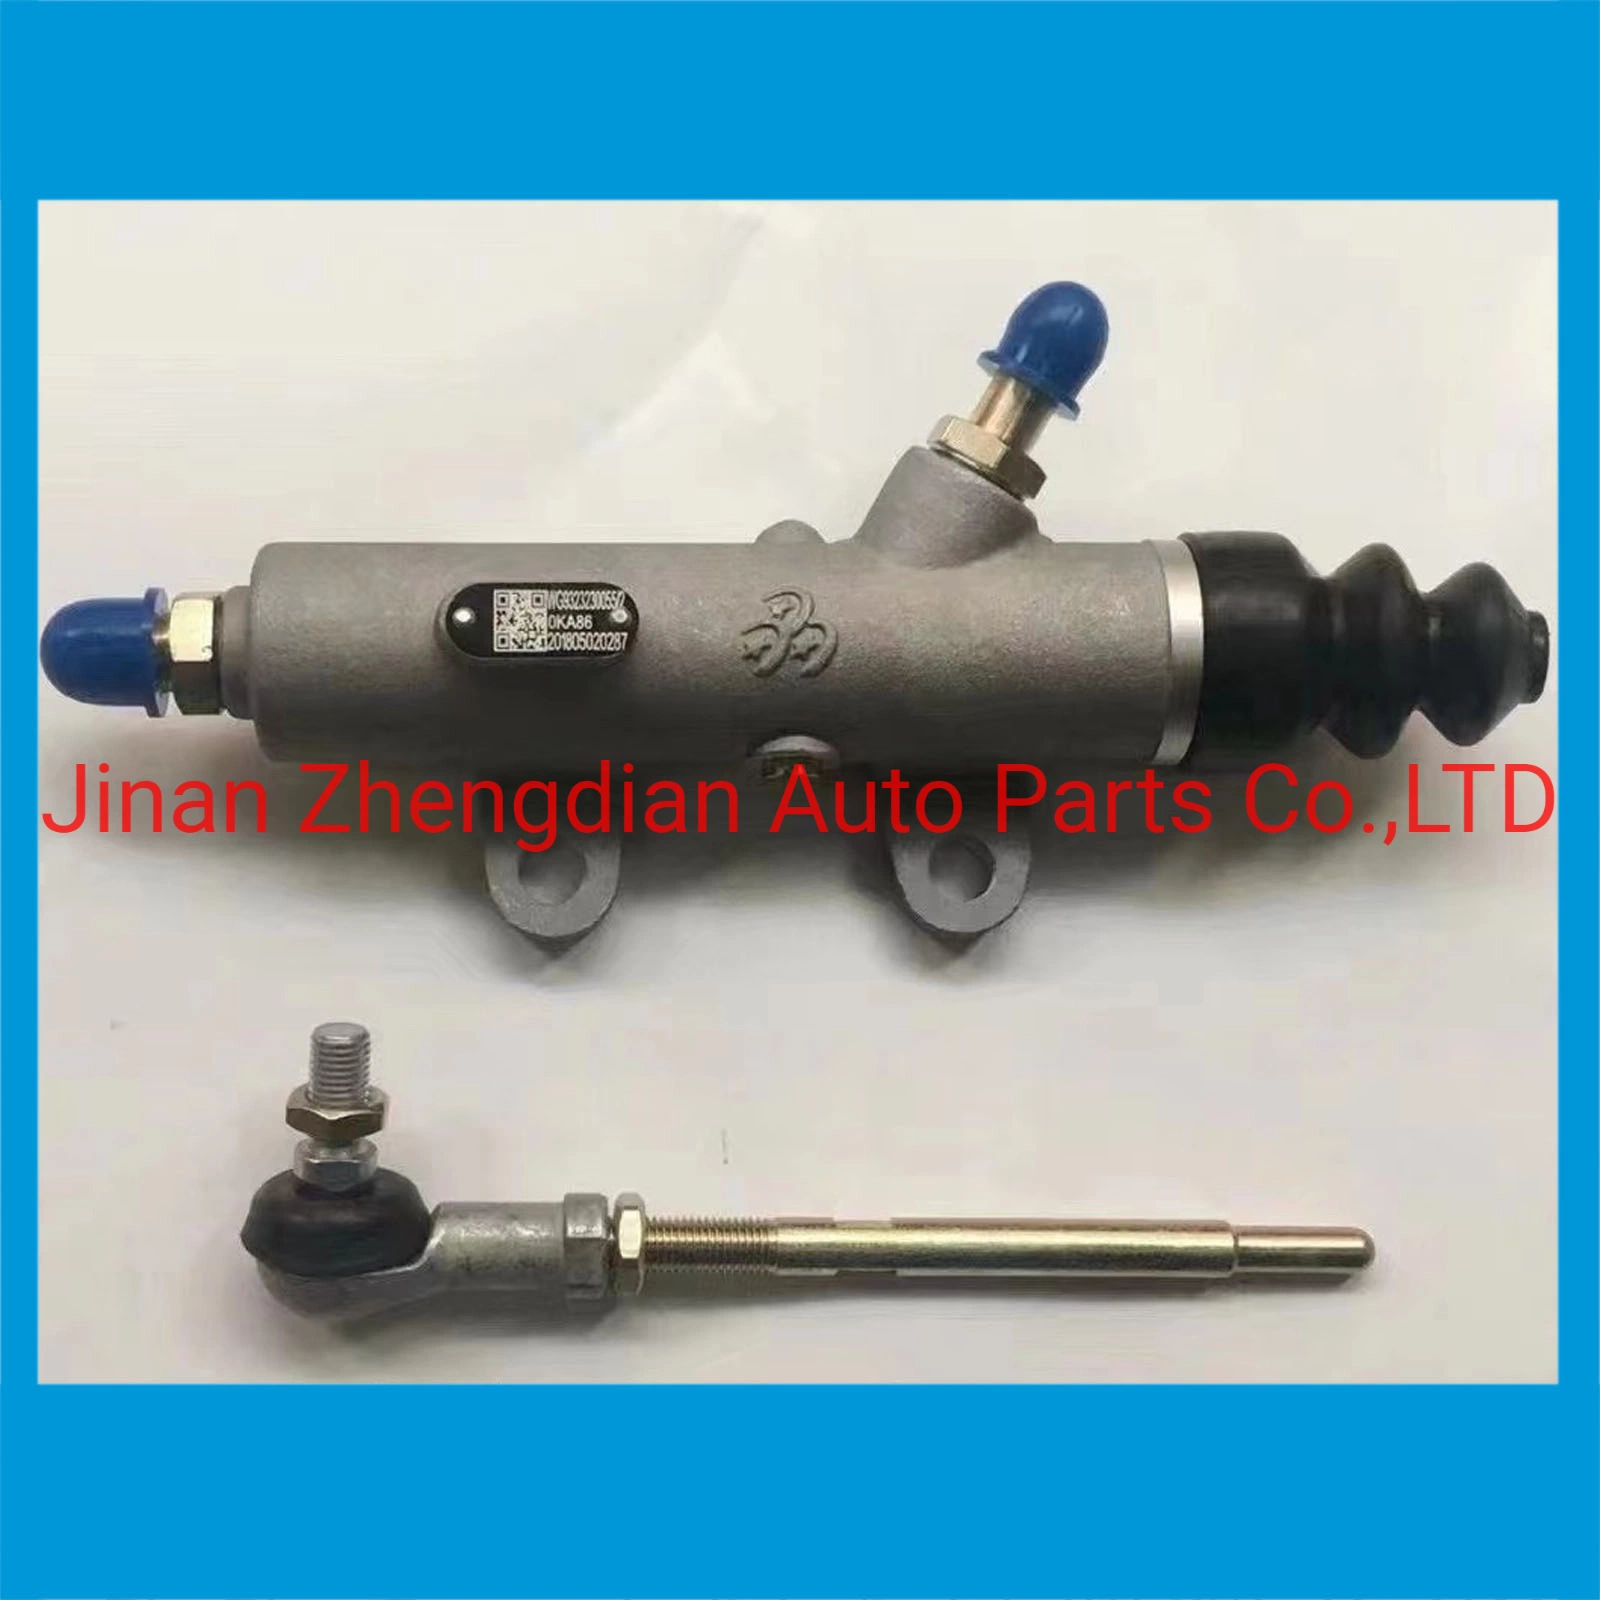 Wg9925230540 Clutch Master Cylinder for Sinotruk T7h Steyr Sitrak Beiben Shacman FAW Foton Auman Camc Hongyan Dongfeng Truck Spare Parts